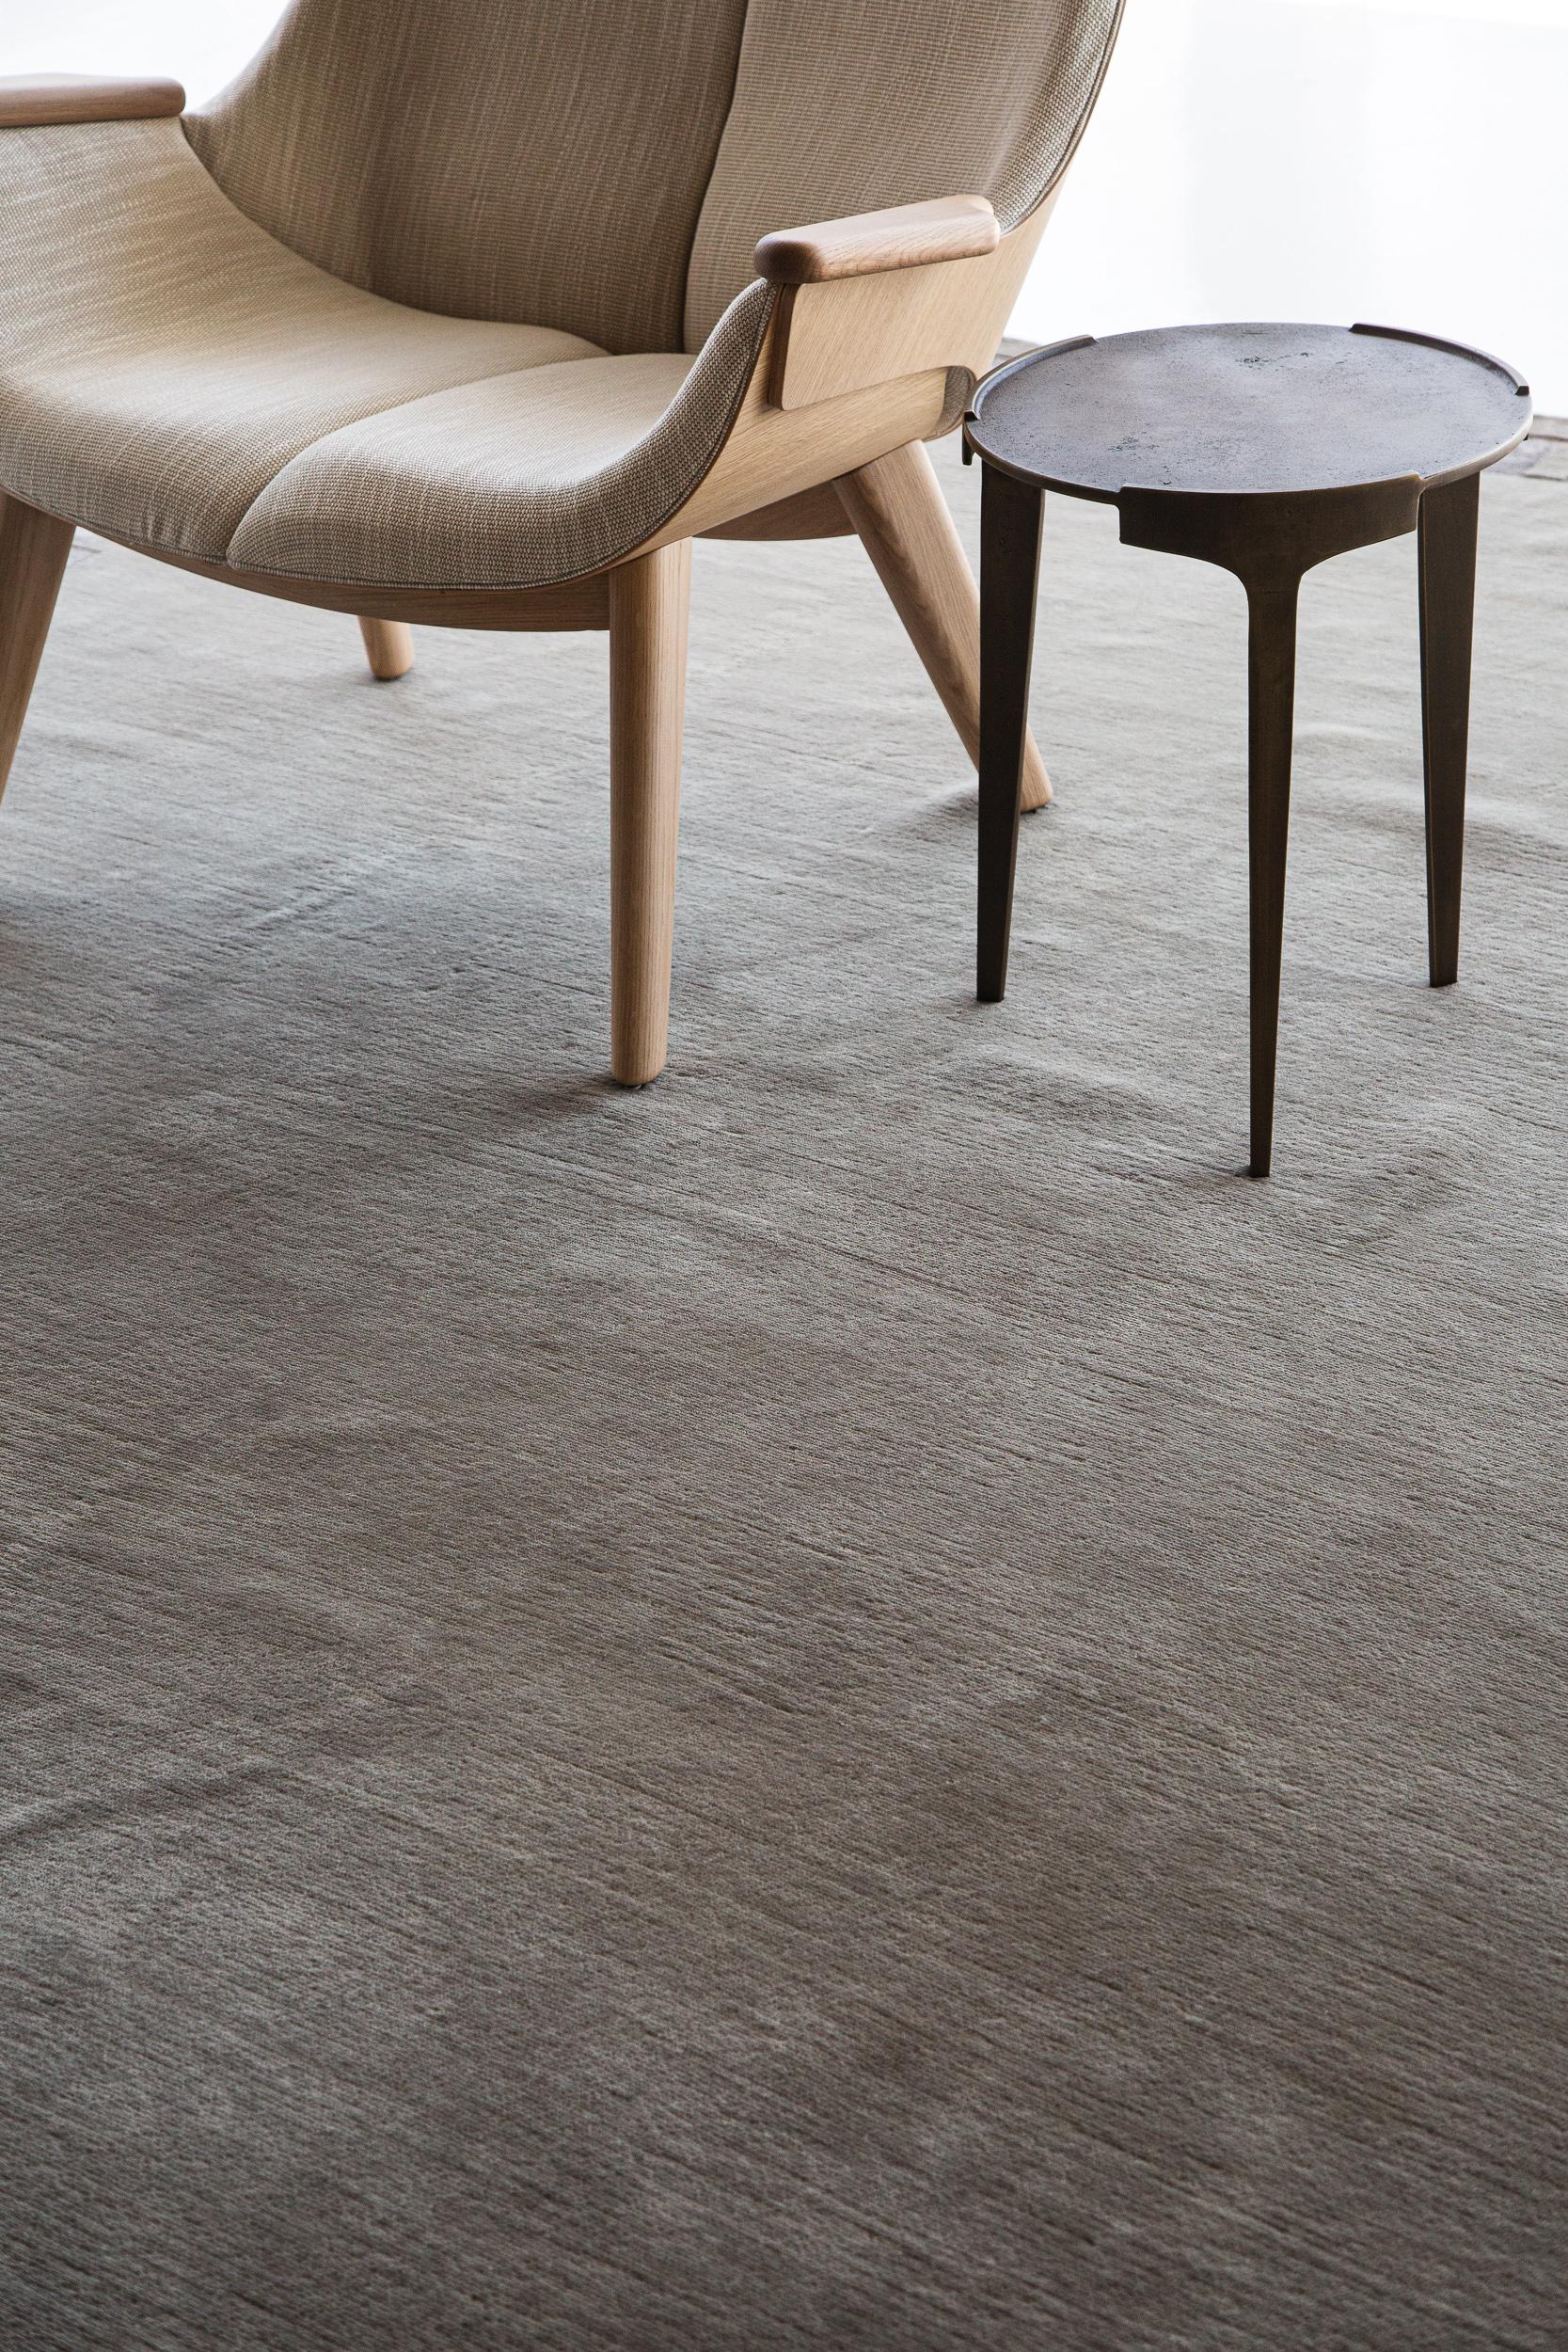 Arcade is a luxurious taupe pile weave hand knotted in wool and bordered with silk design elements. This sleek and sophisticated piece from Mehraban's Design Rhymes Collection inspired by different forms of architectural work in the modern design